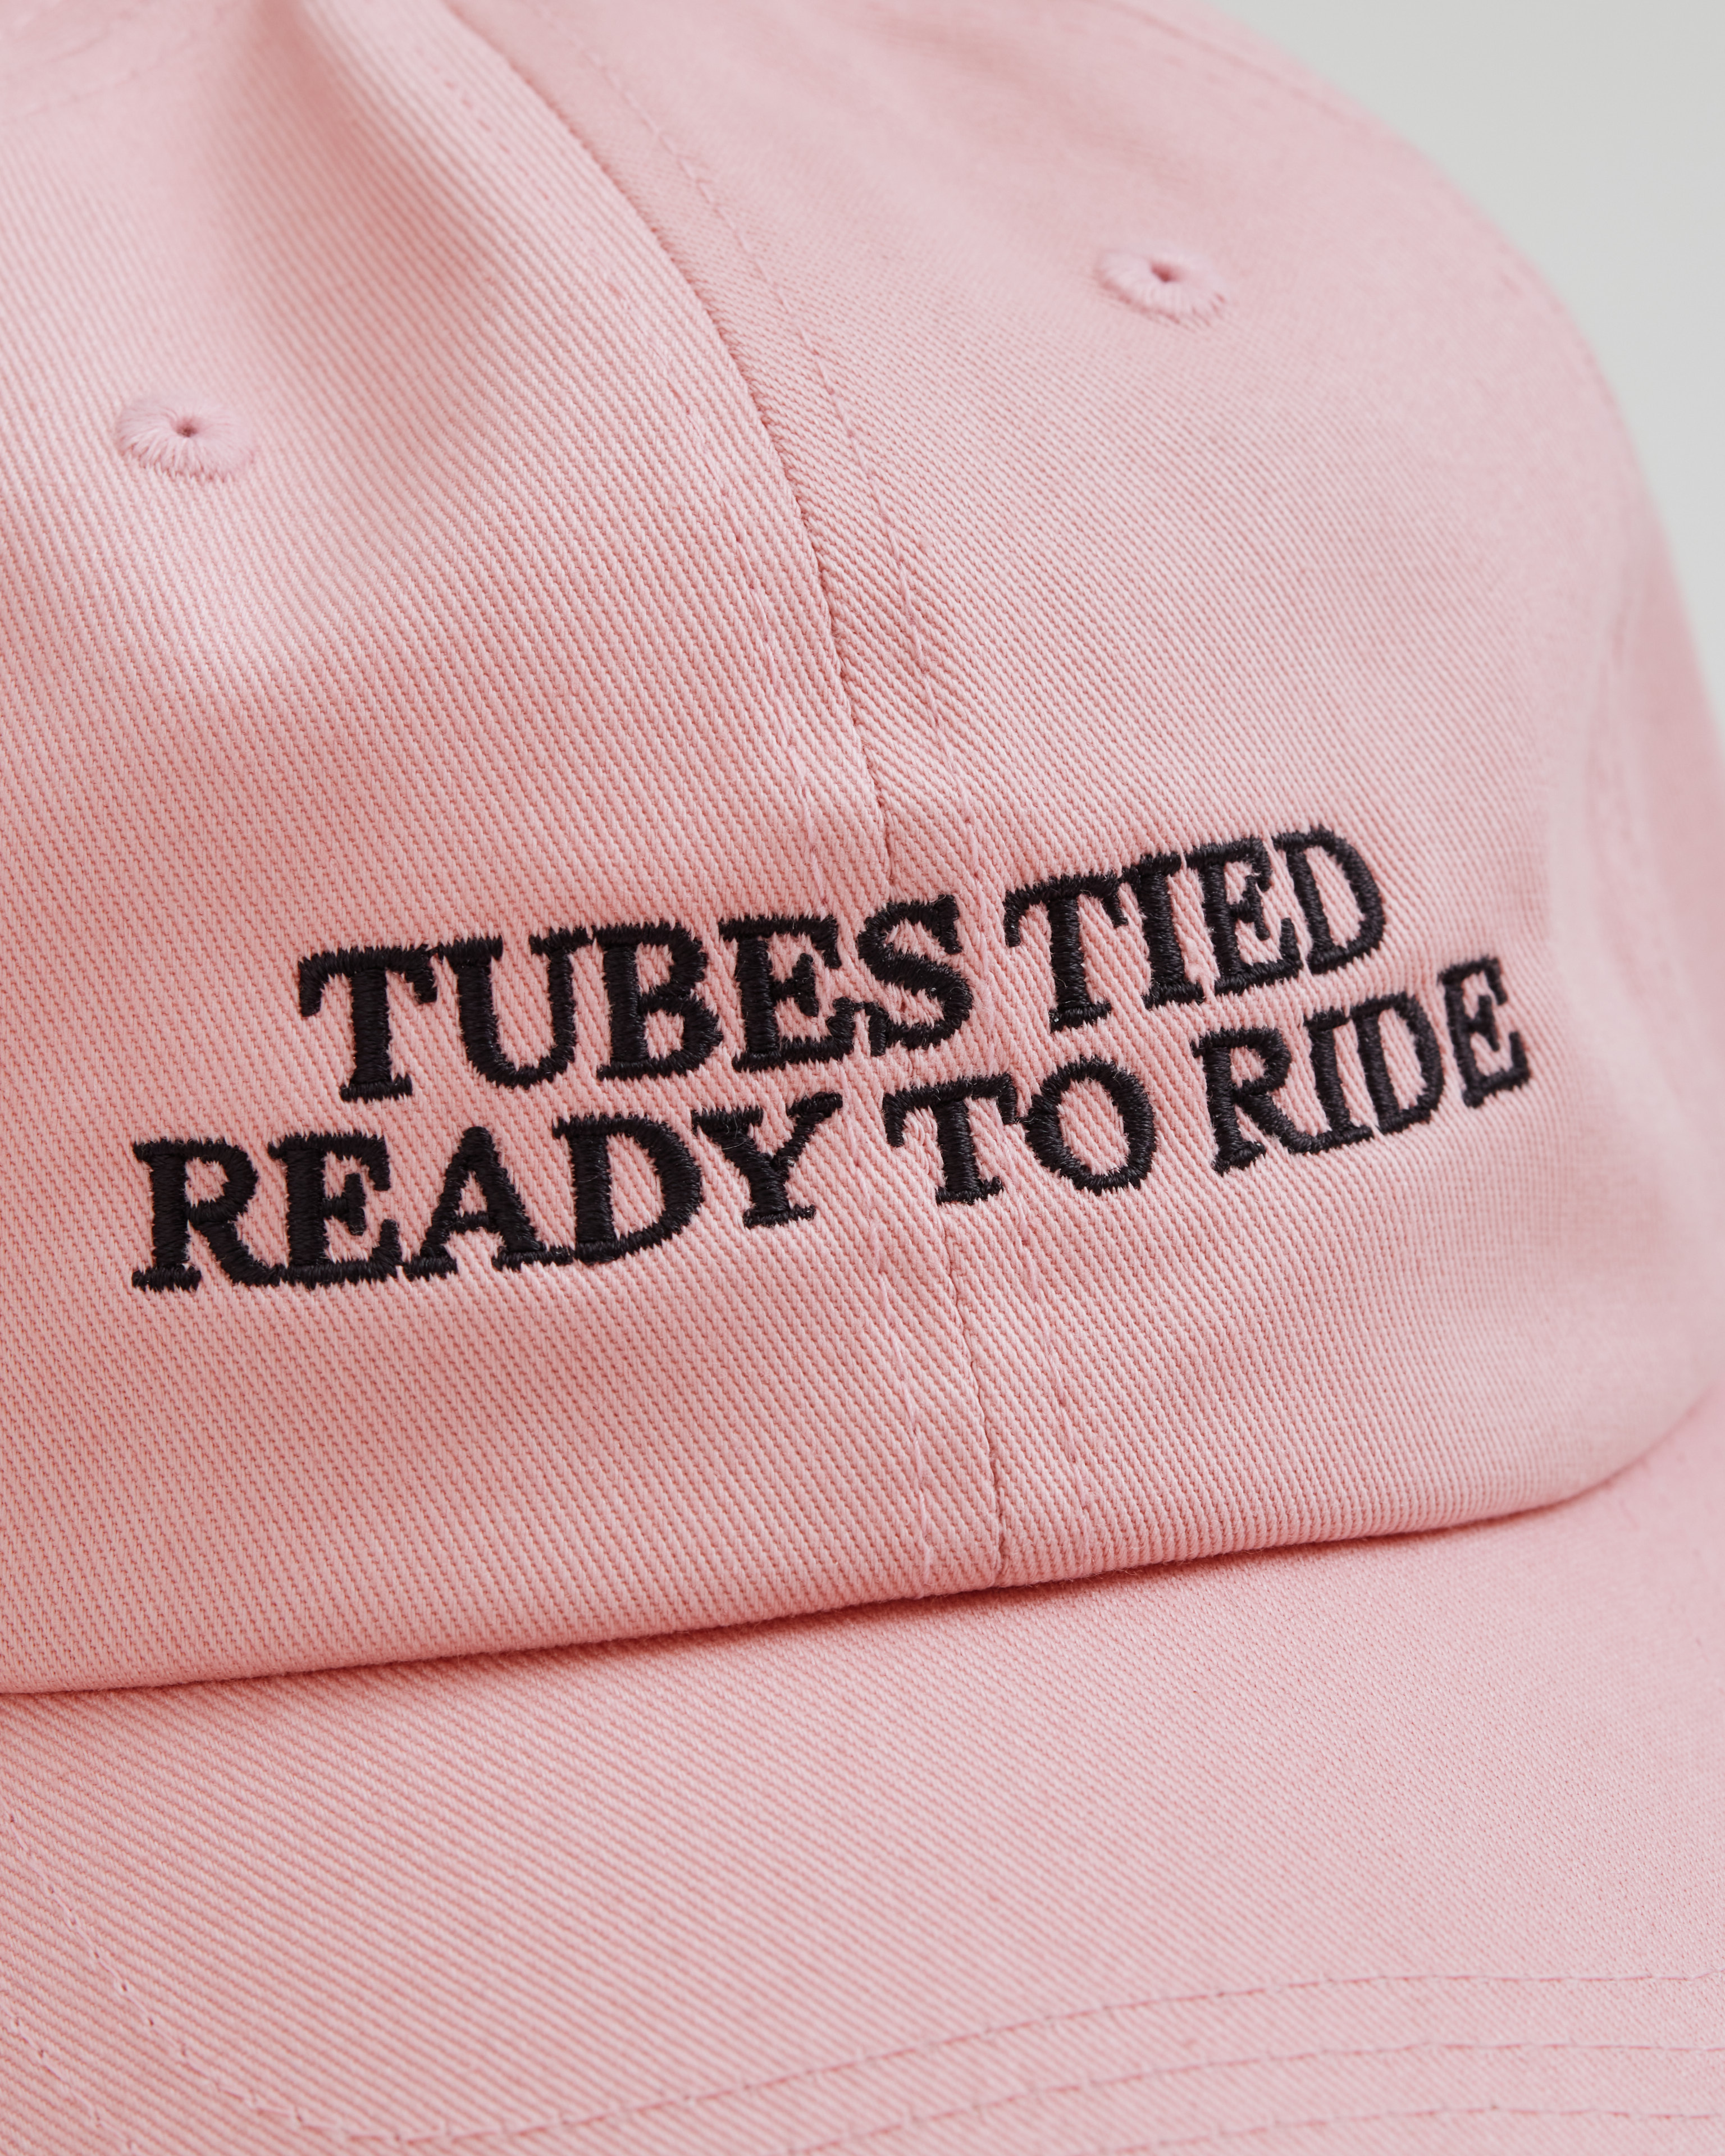 Tubes Tied Ready to Ride dad cap pink close-up